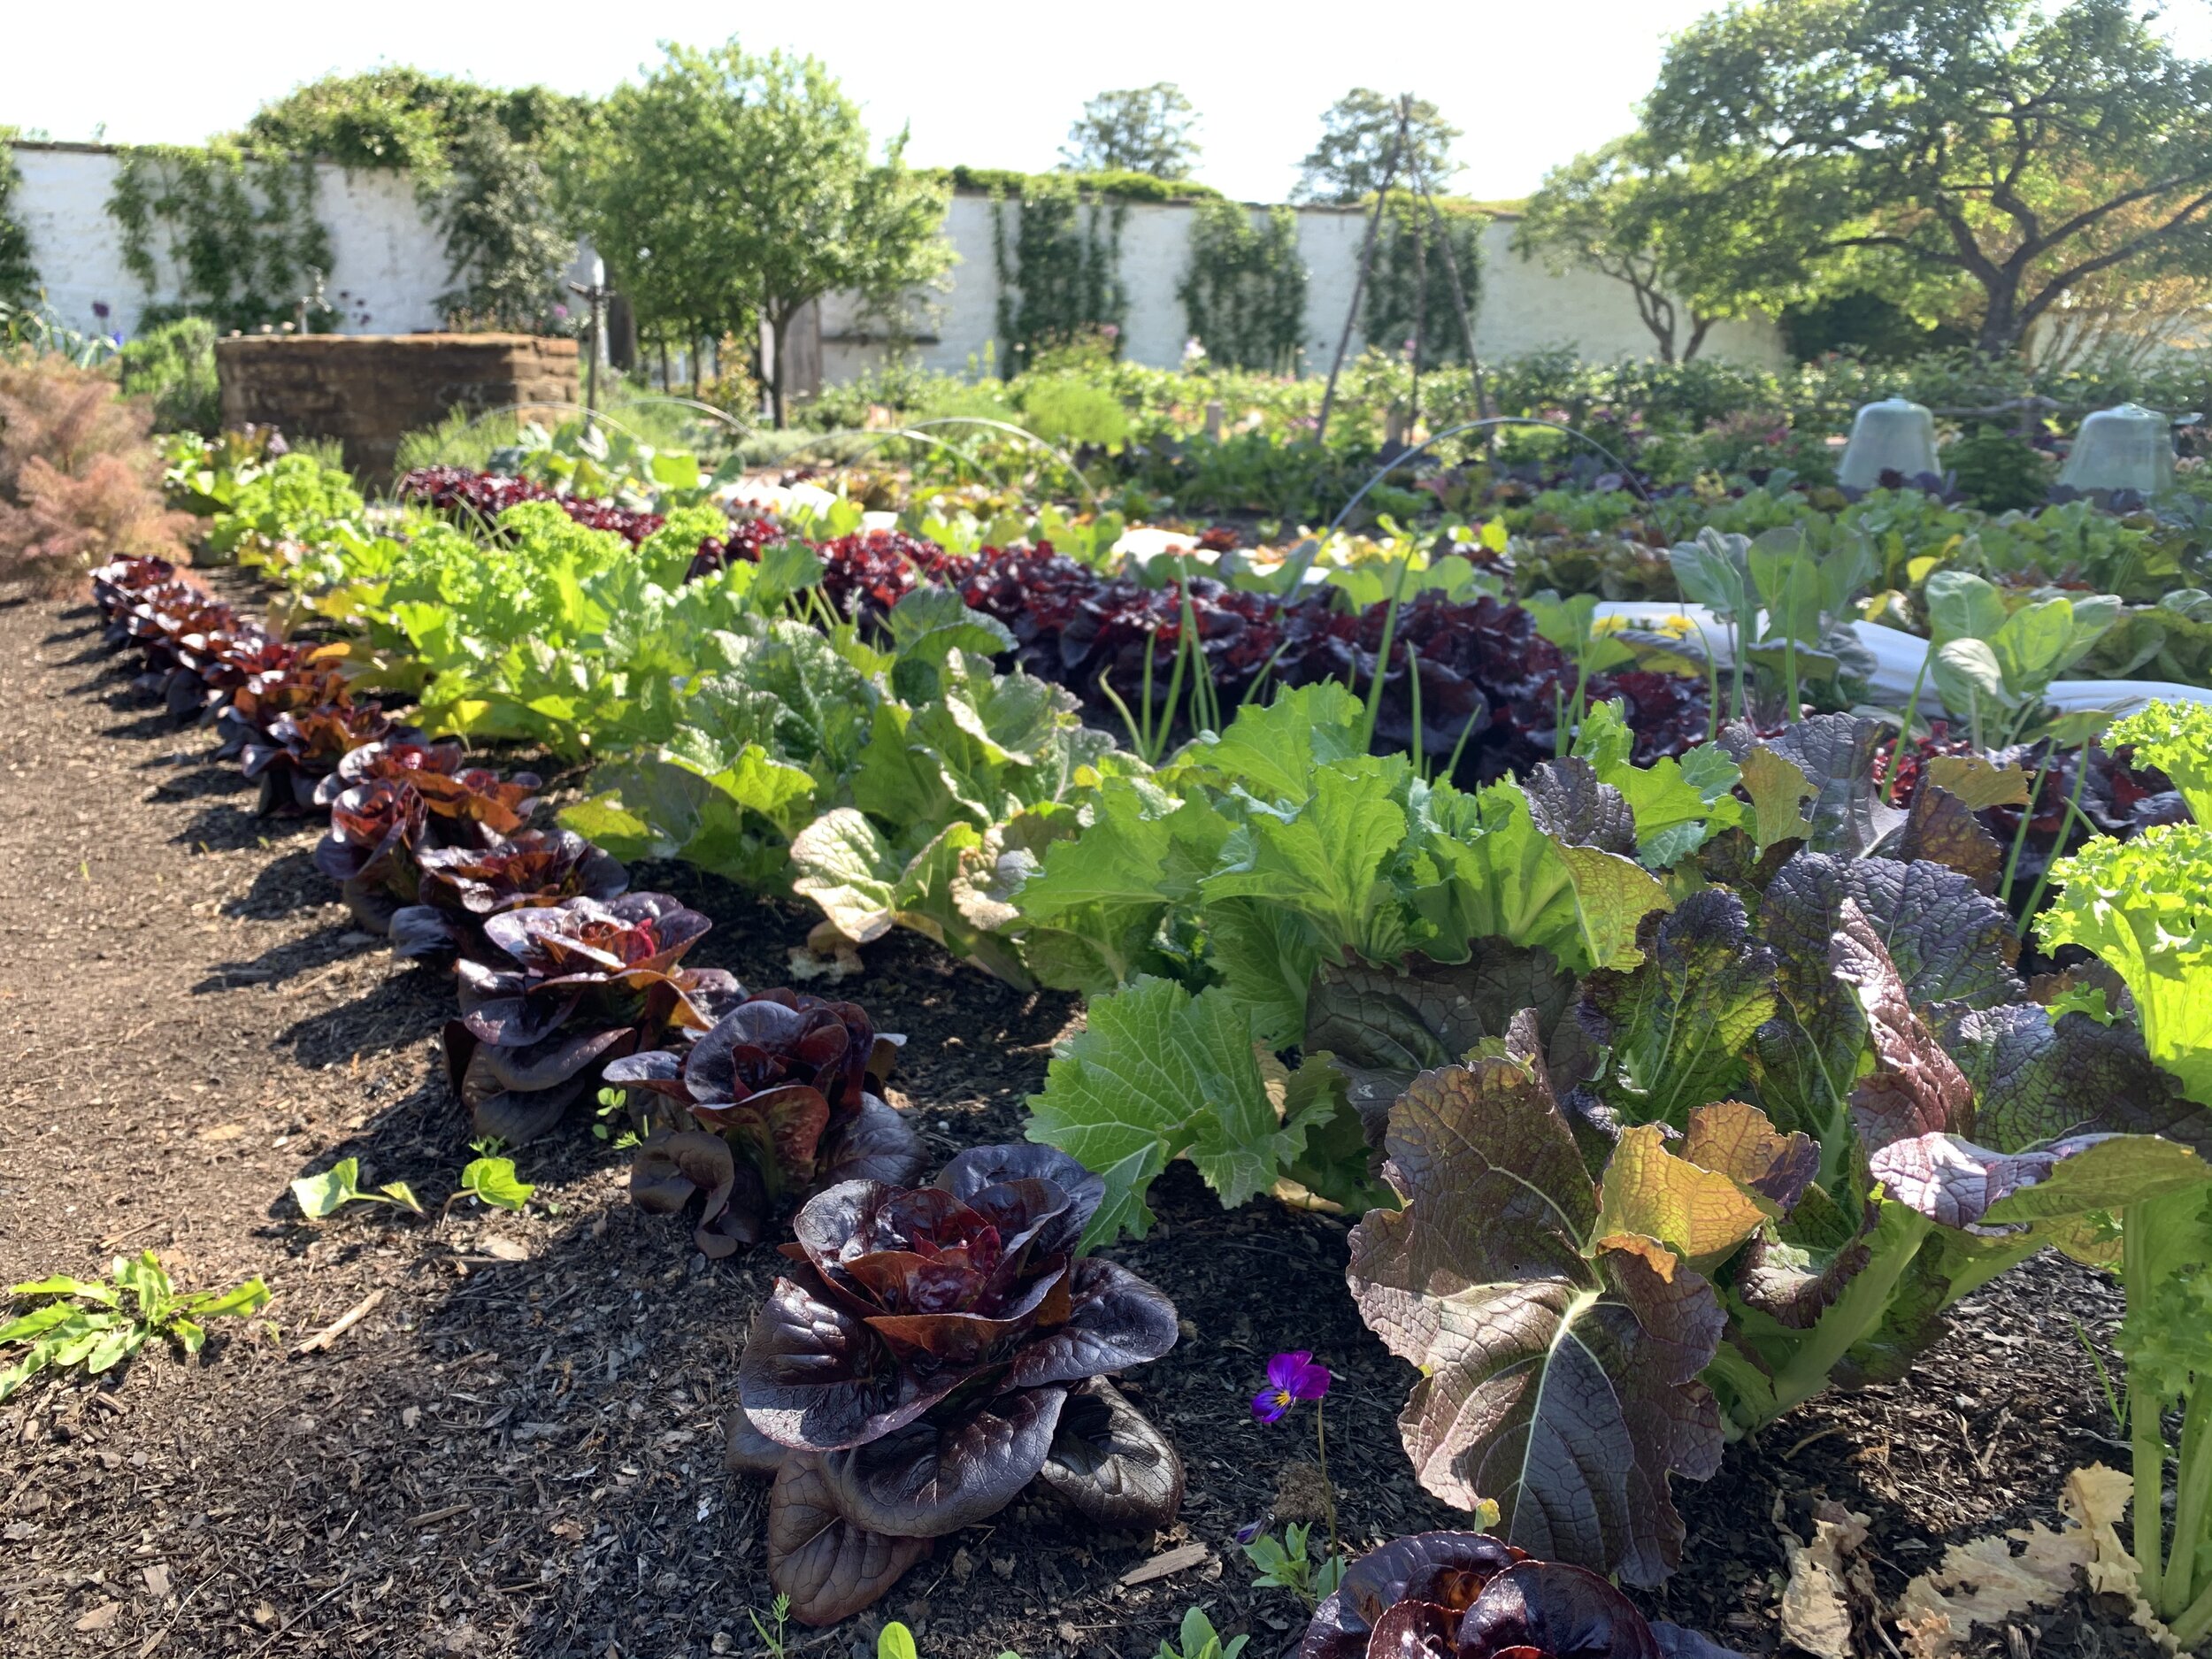  Mrs. Mellon created a large potager garden in her walled garden at Oak Spring in the French tradition. Rows of colorful vegetables, including 'Little Red Gem' lettuce, 'Wild Garden Mix' mustard, 'Zermatt' leeks, and bronze fennel add color to the sp